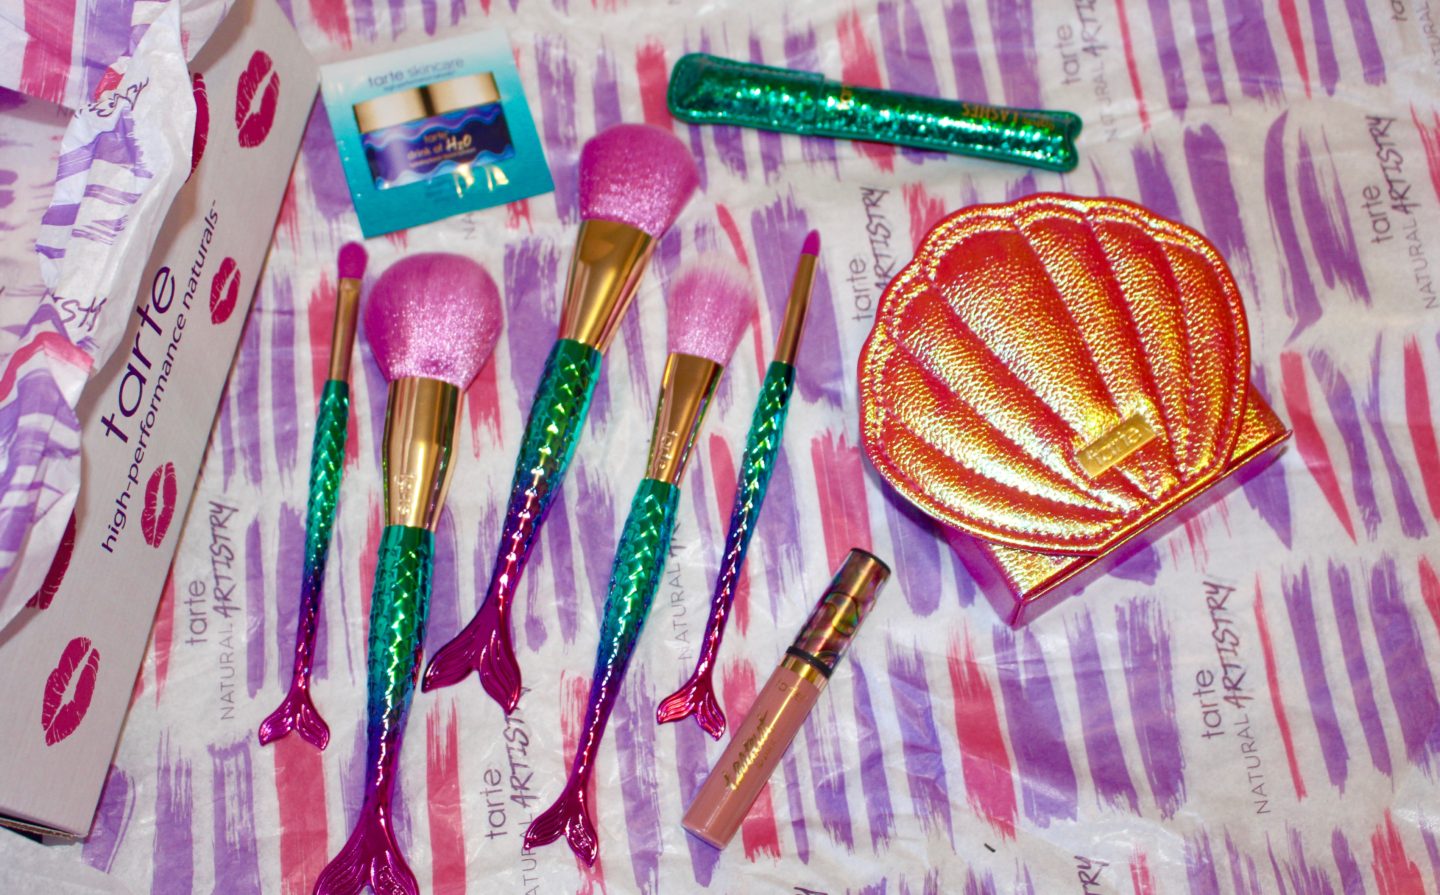 Product Review: Tarte Mermaid Collection